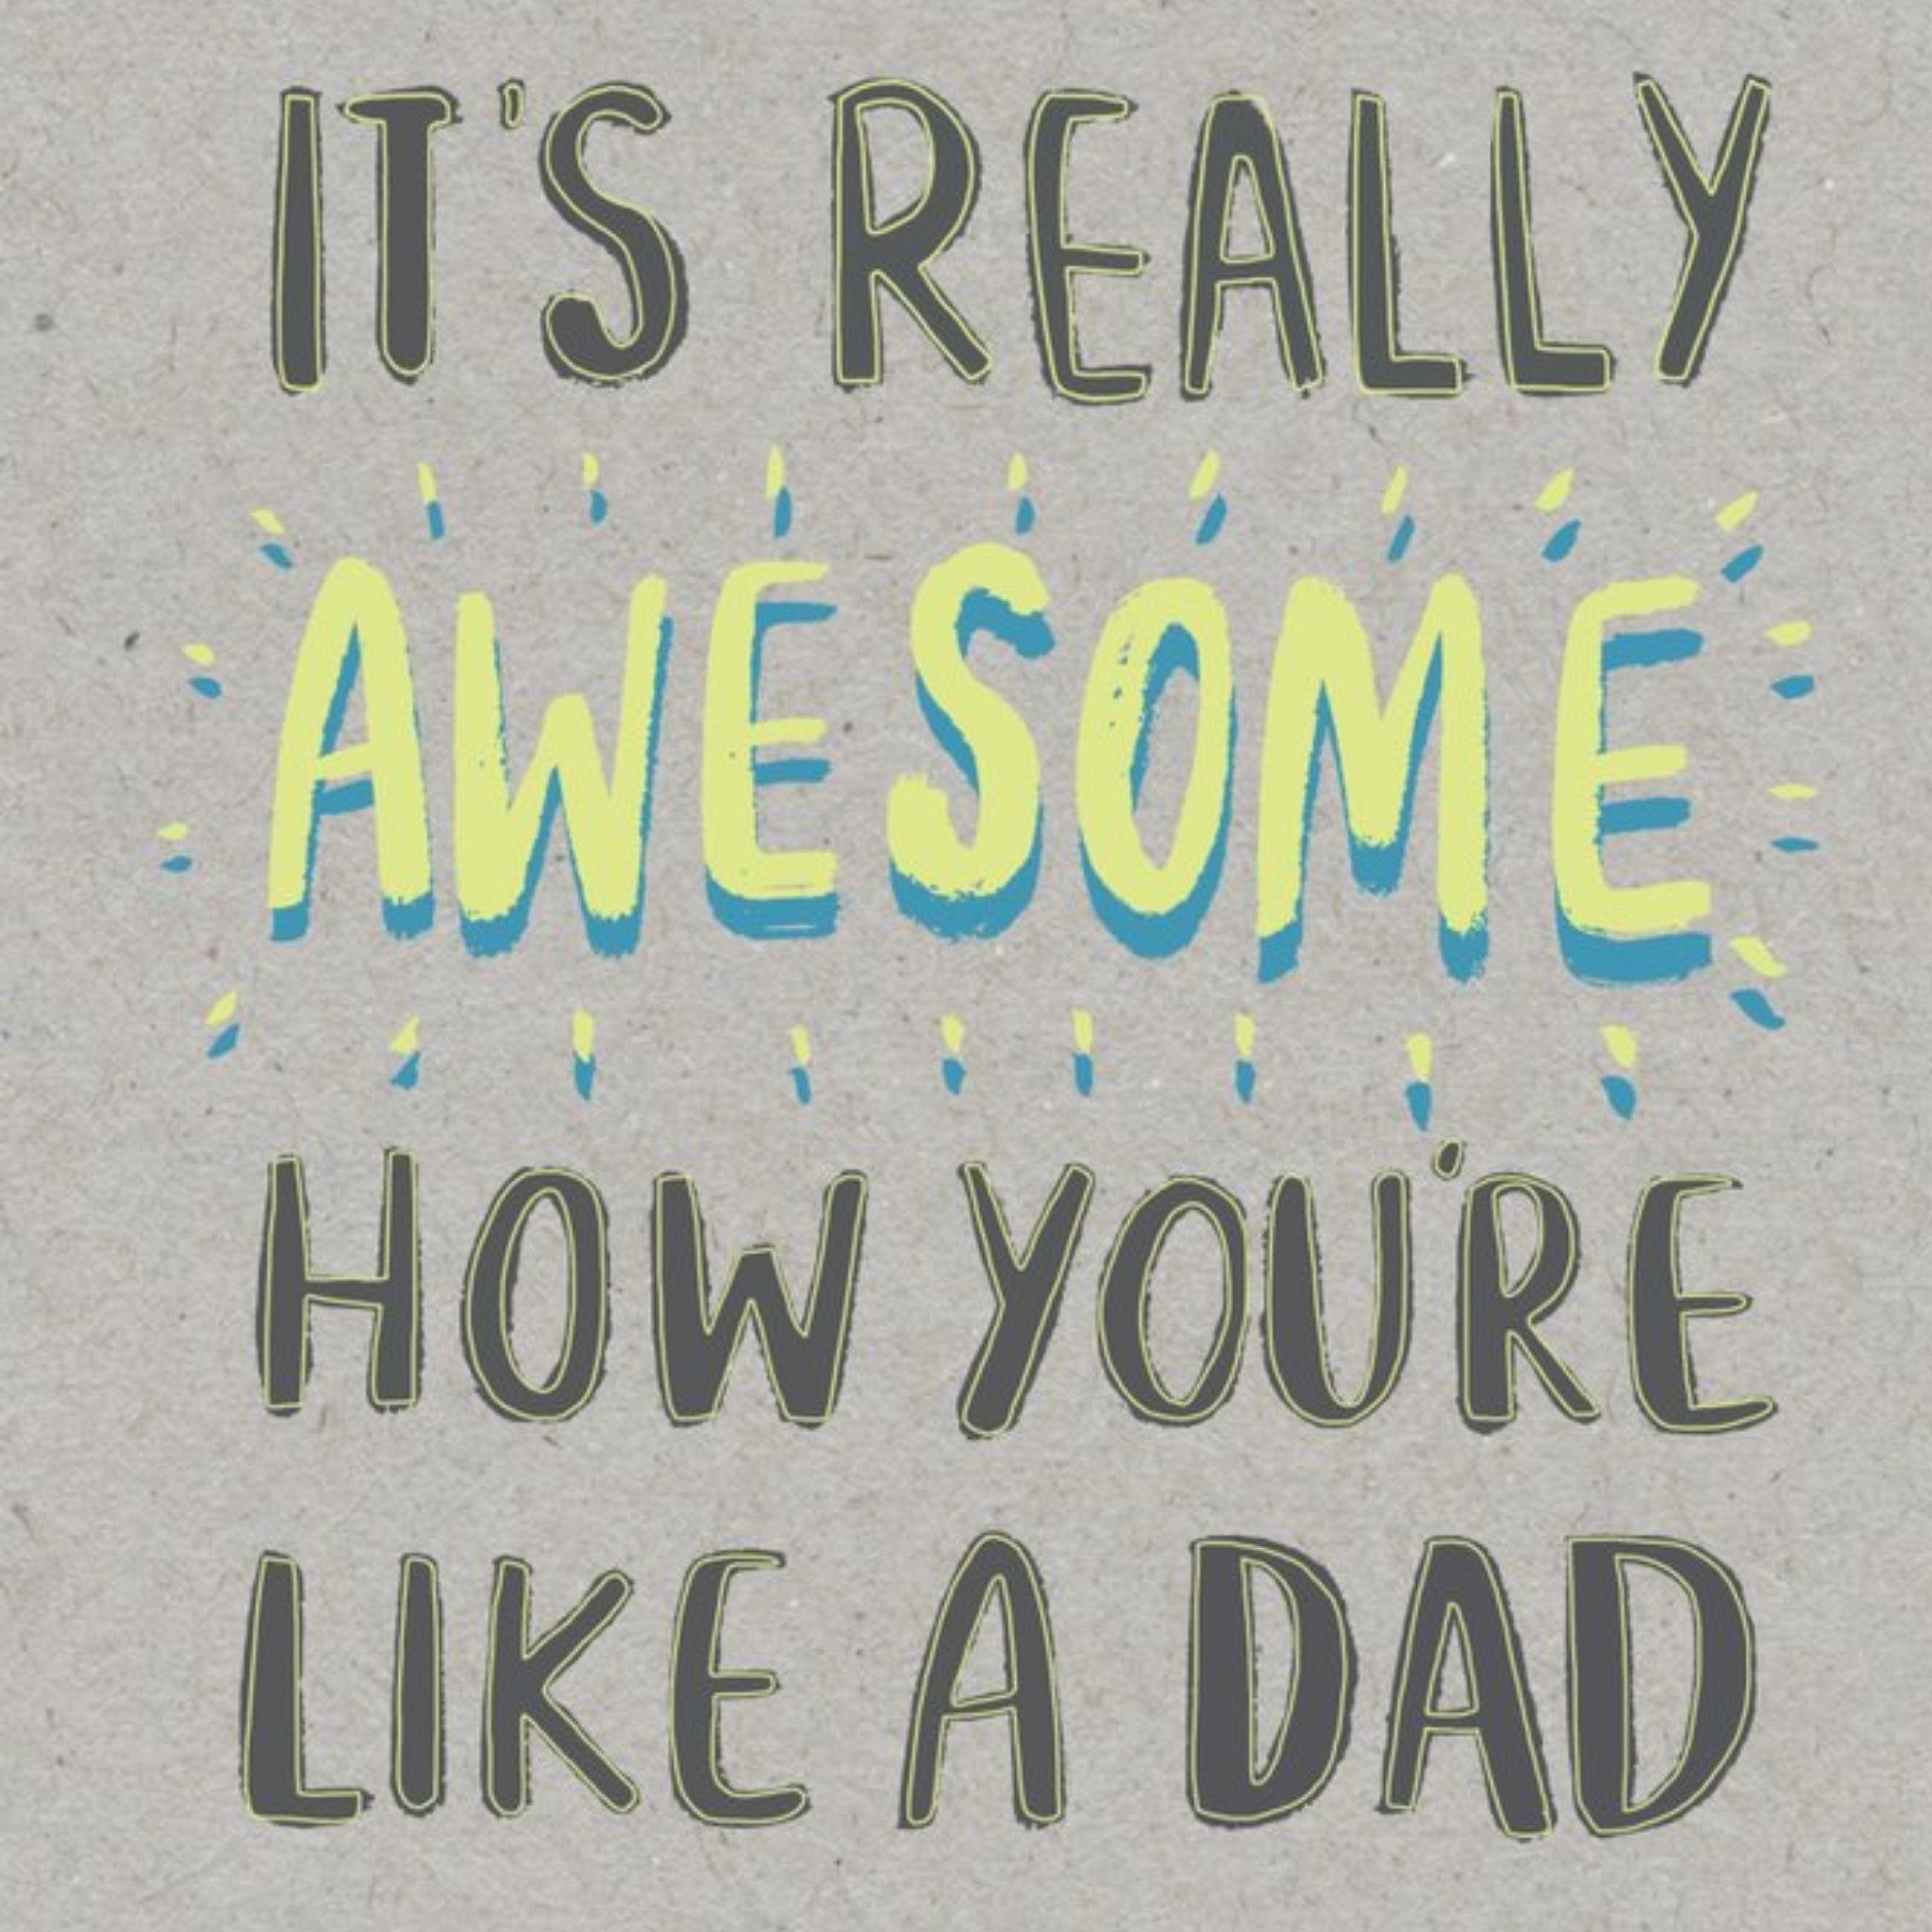 Moonpig Its Really Awesome How Youre Like A Dad Card, Large